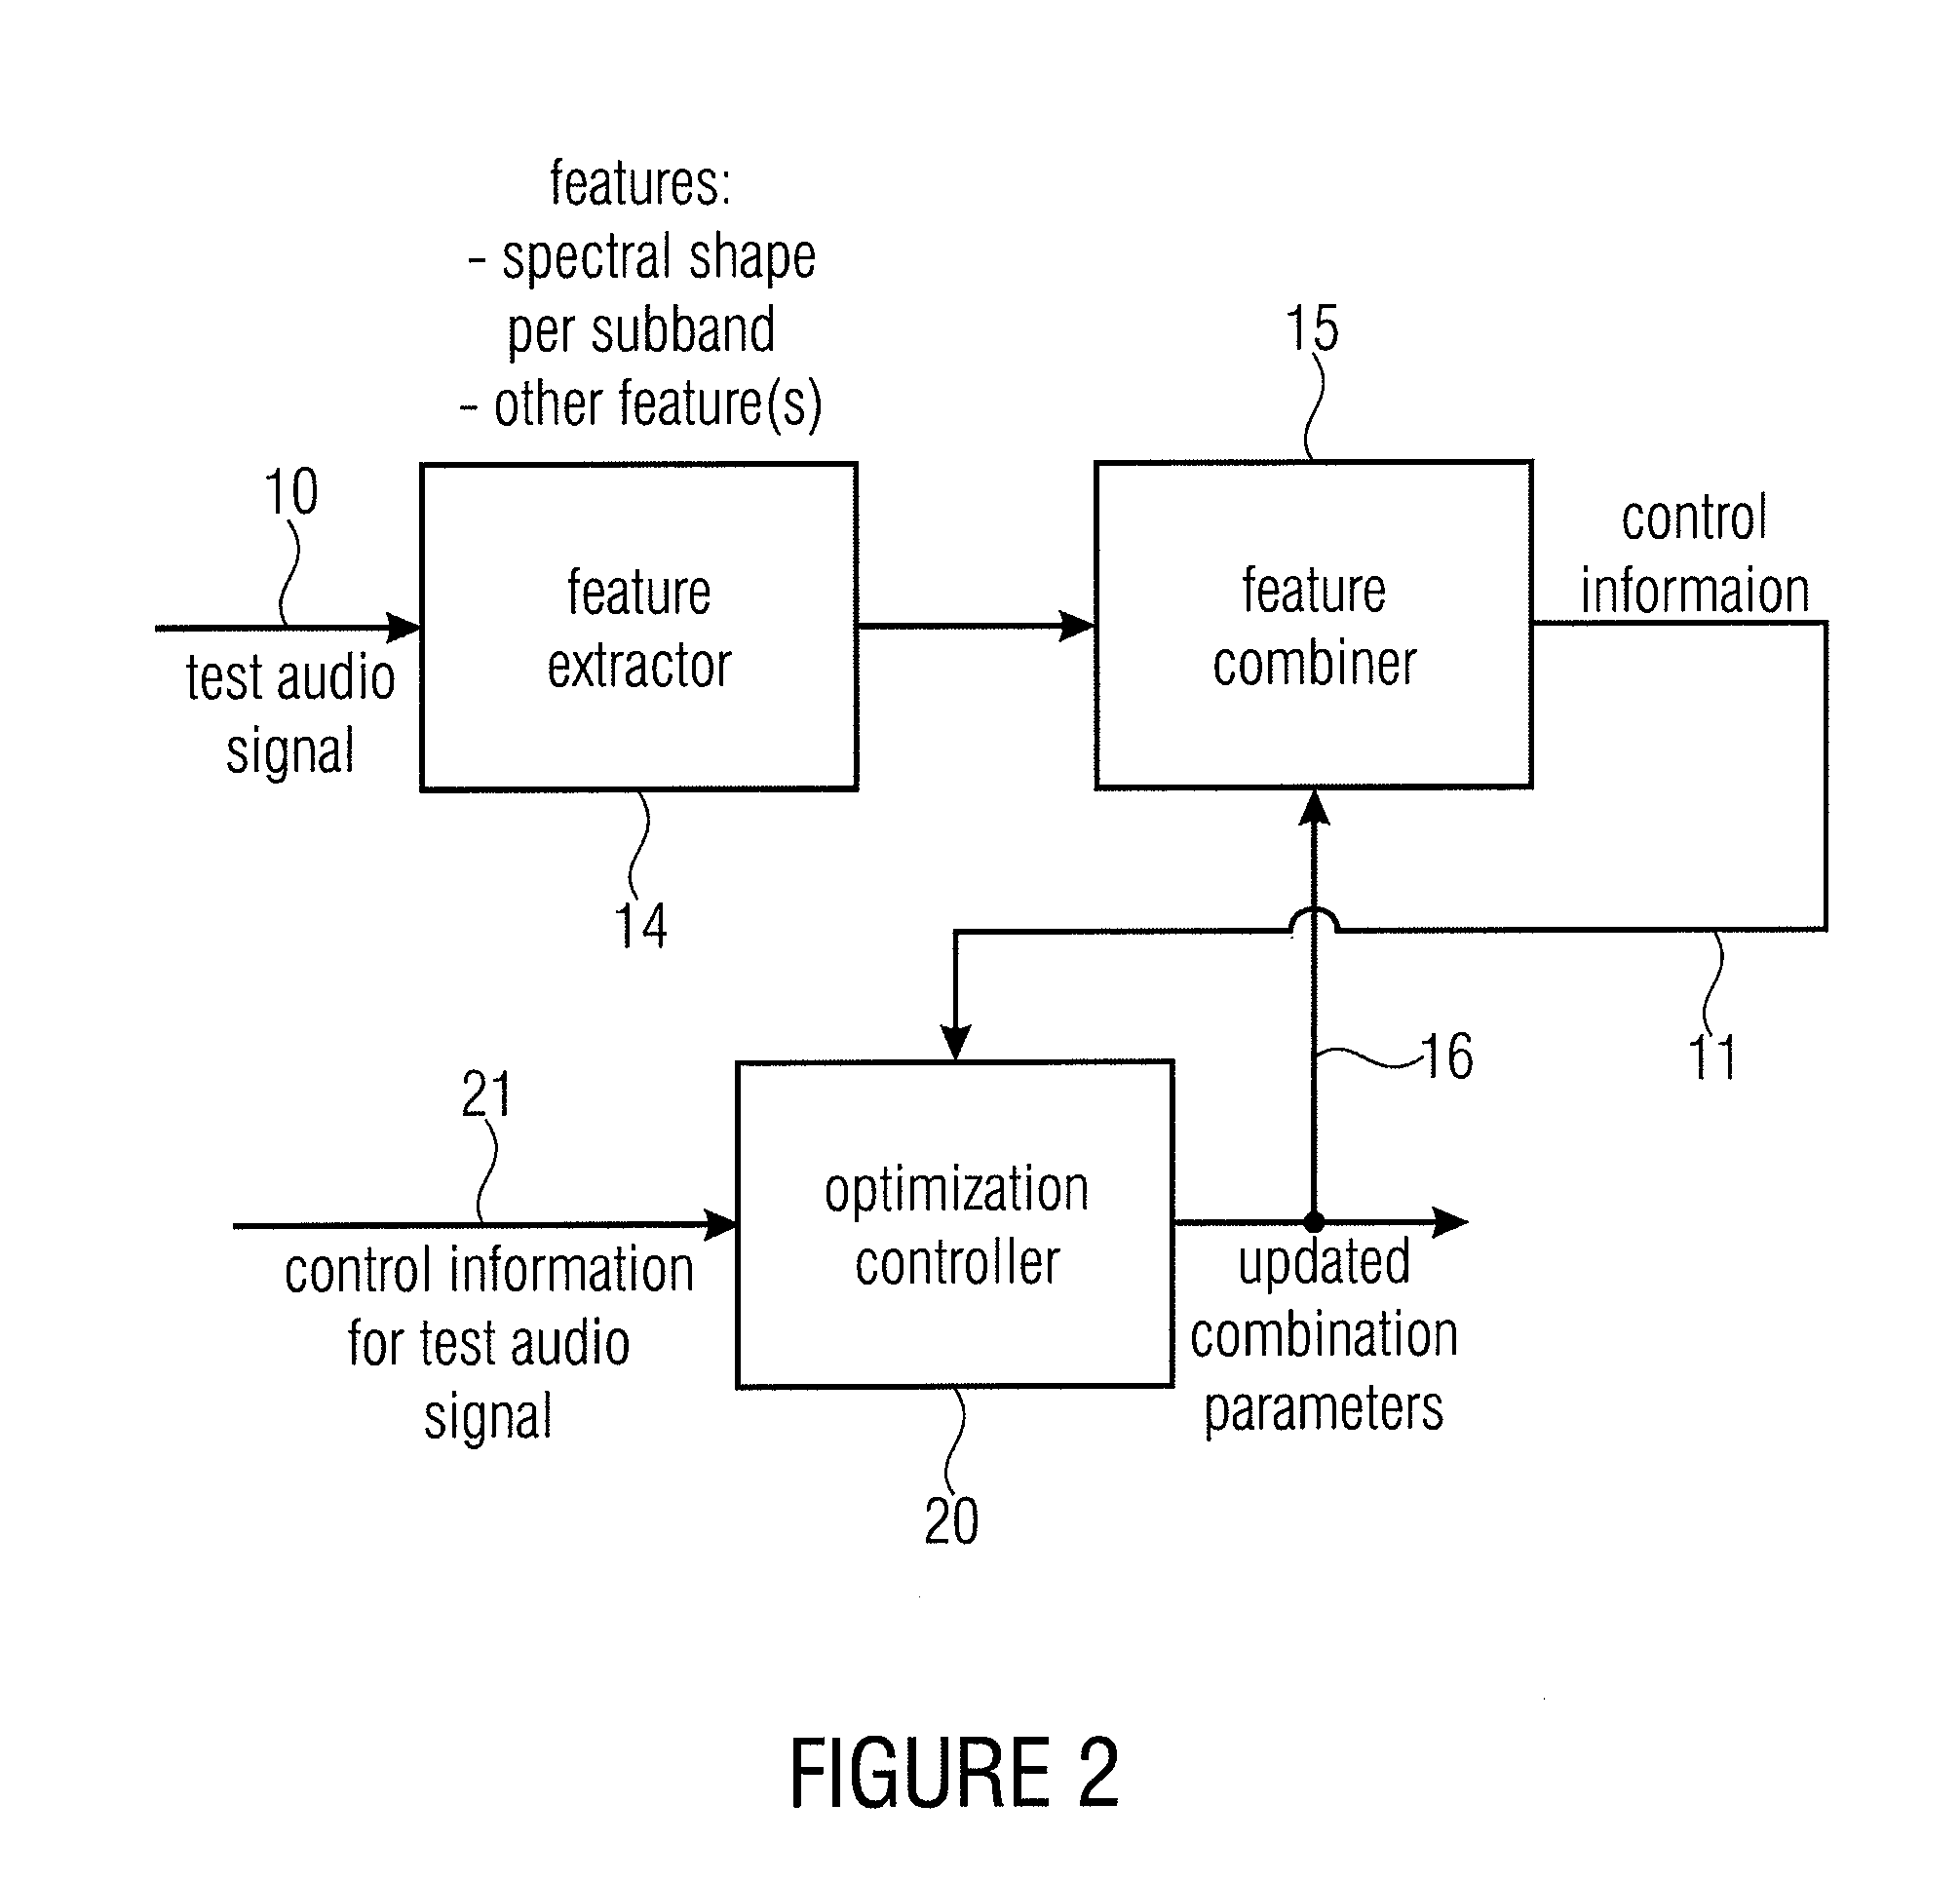 Apparatus and Method for Processing an Audio Signal for Speech Enhancement Using a Feature Extraction